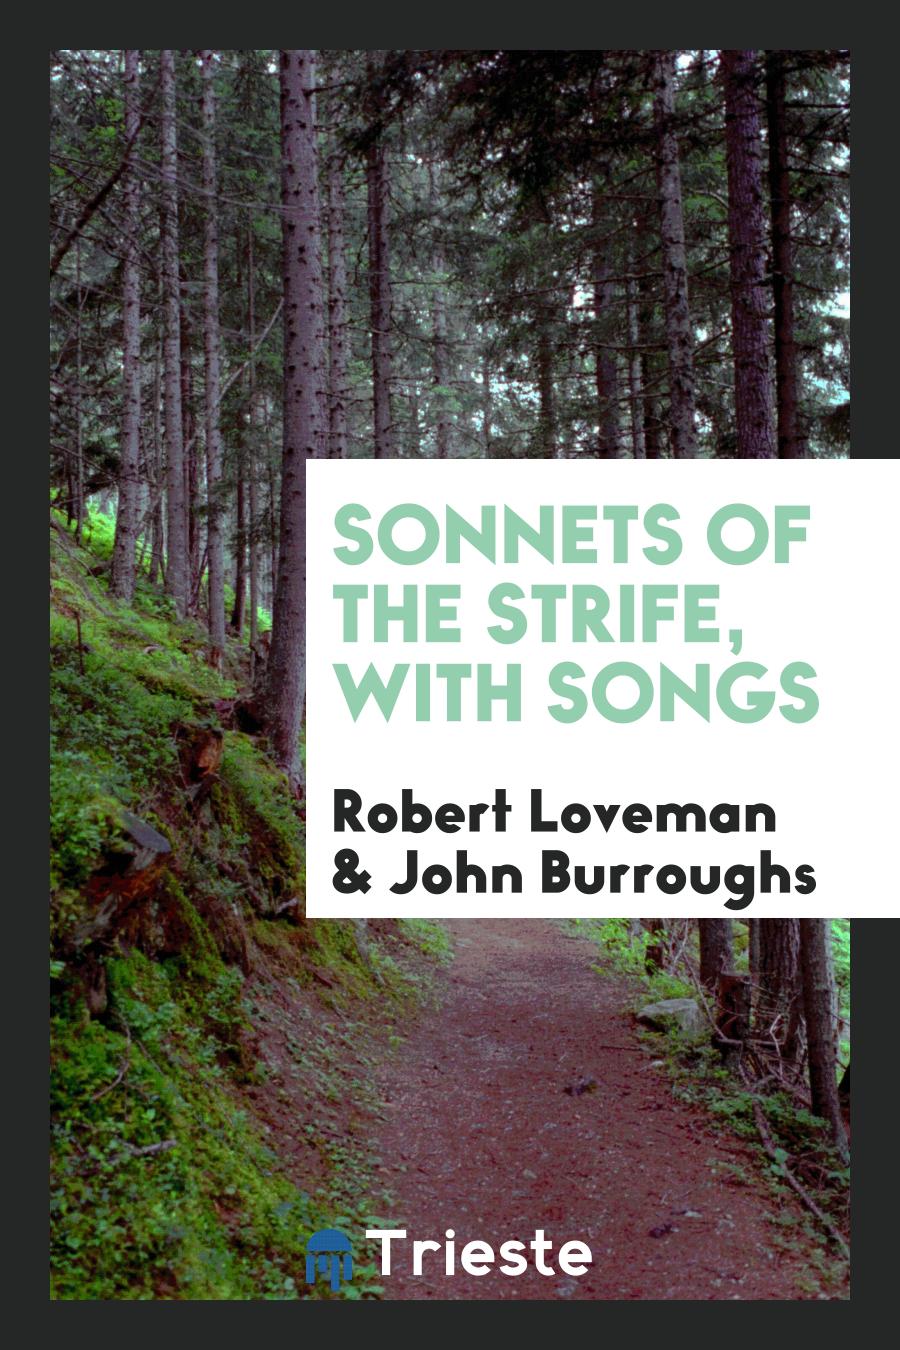 Sonnets of the strife, with songs